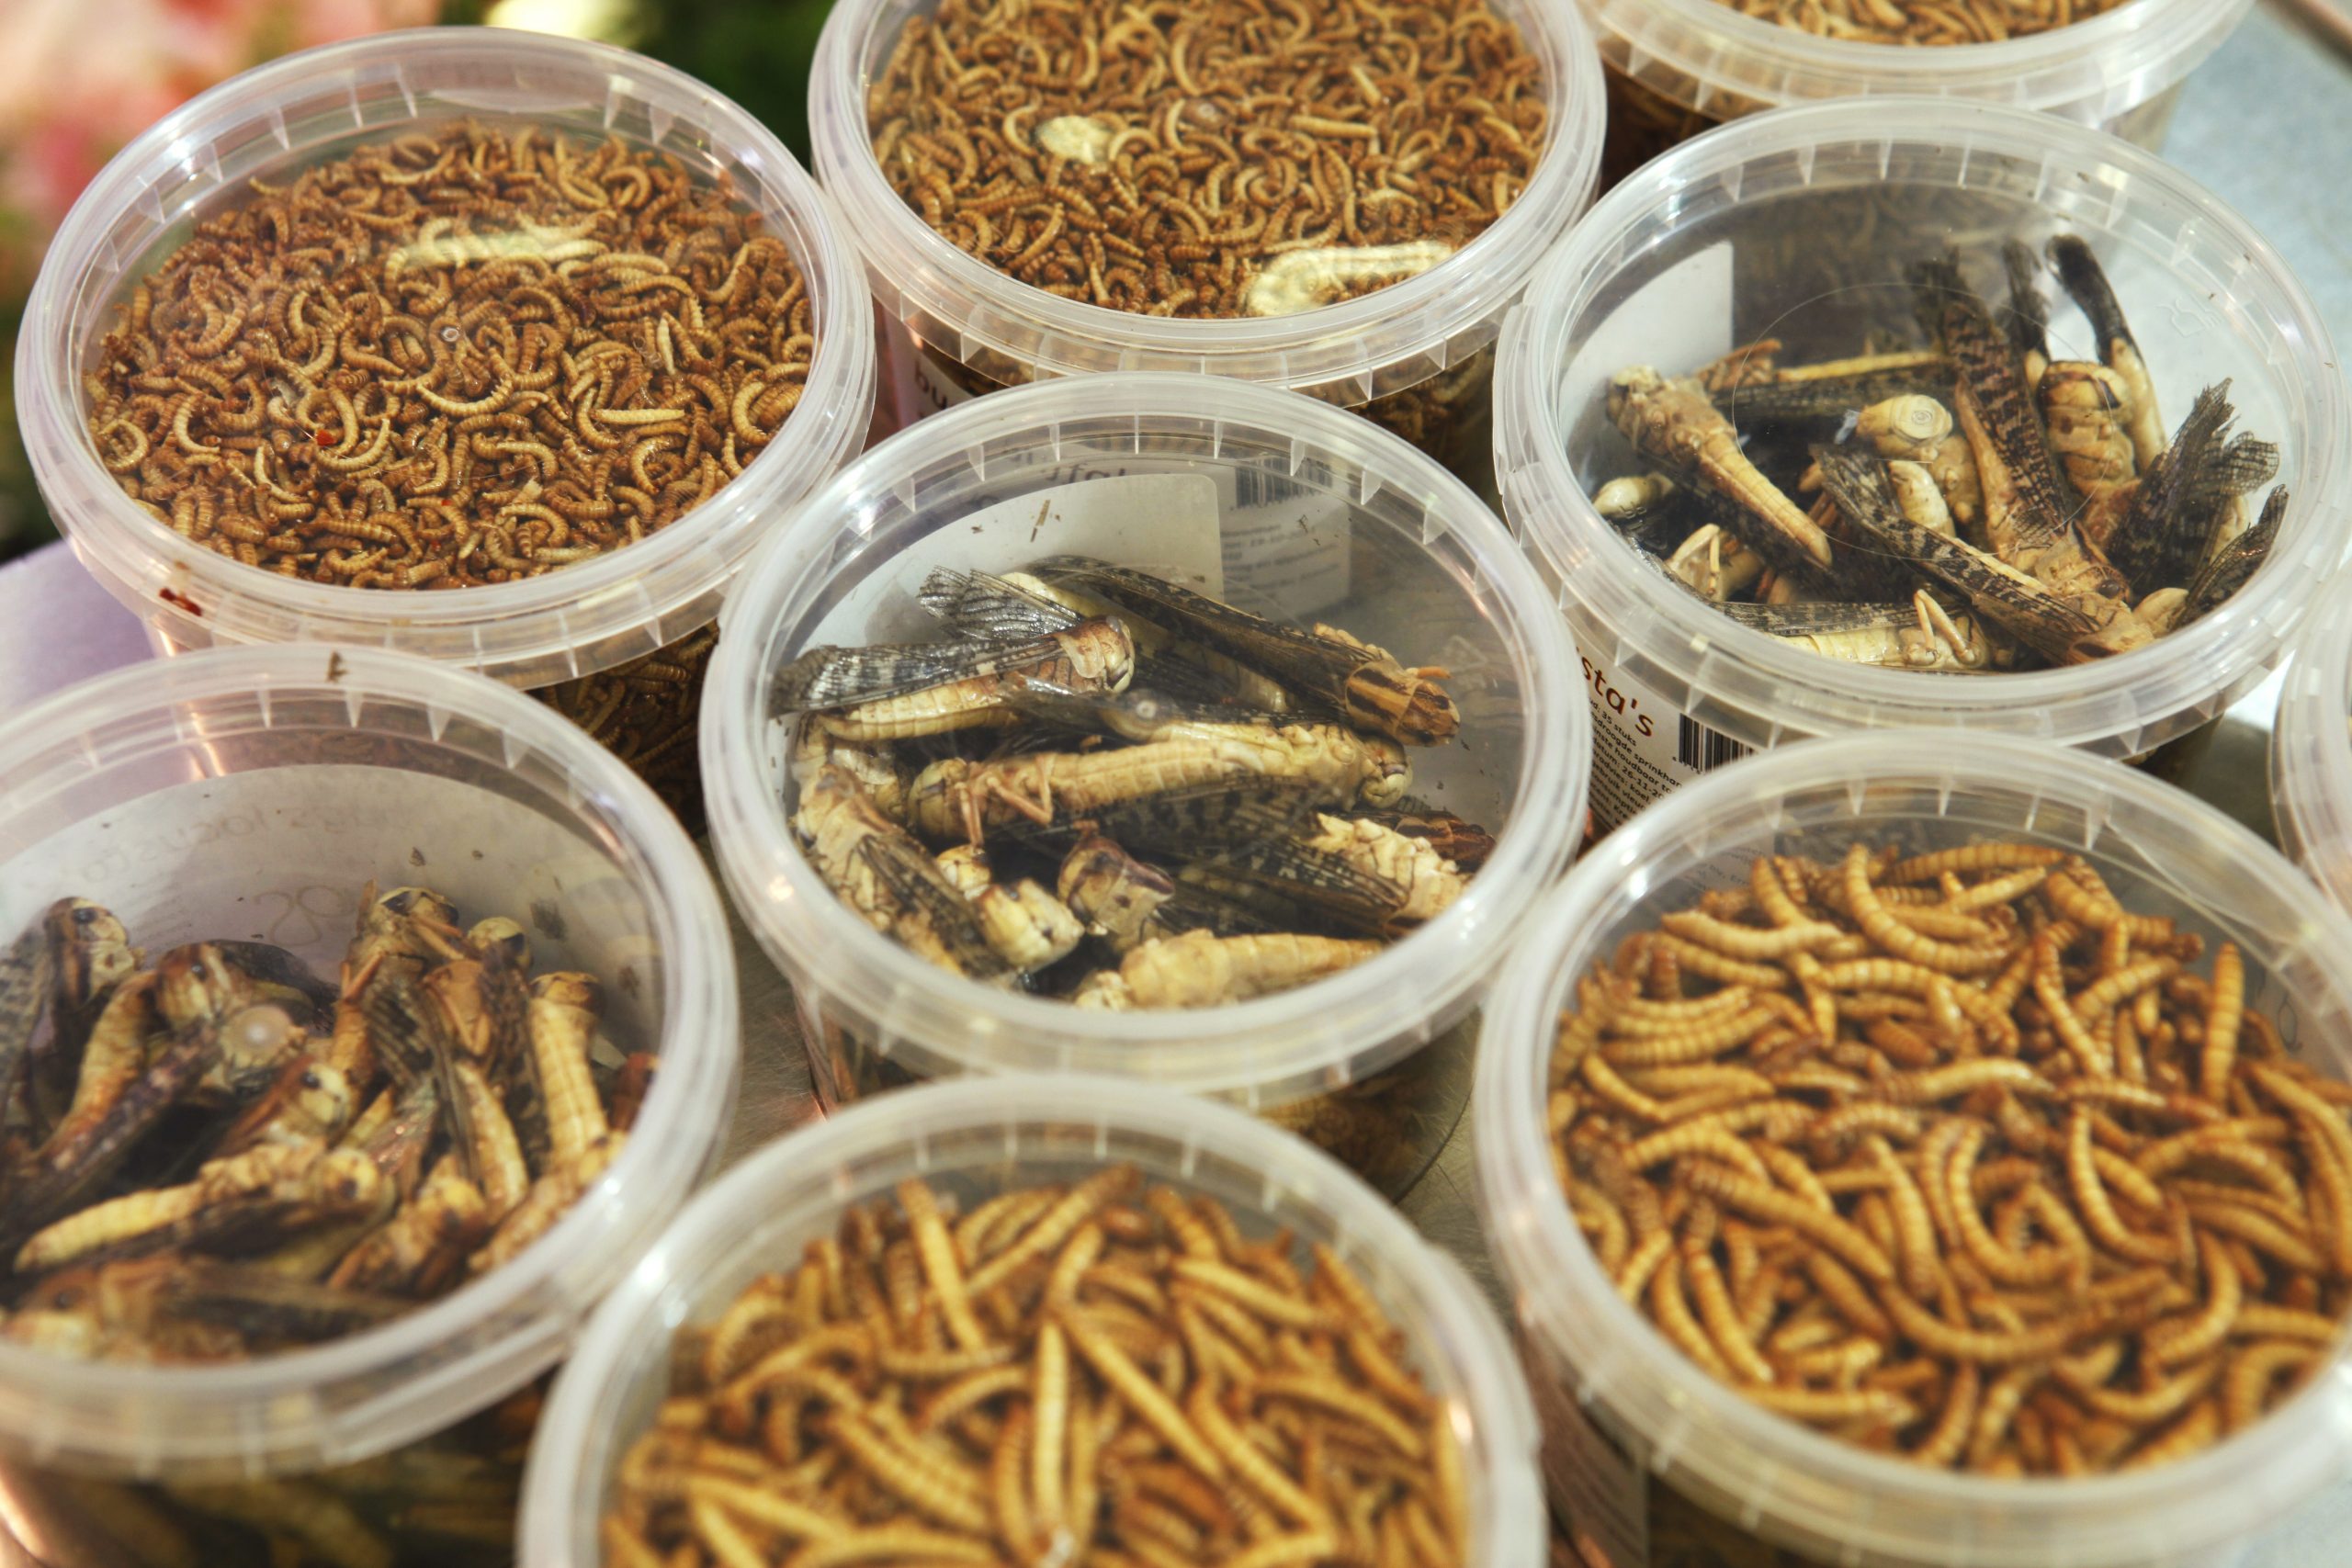 Insects: 3 healthy compounds for animal feed. Photo: Jan Willem Schouten